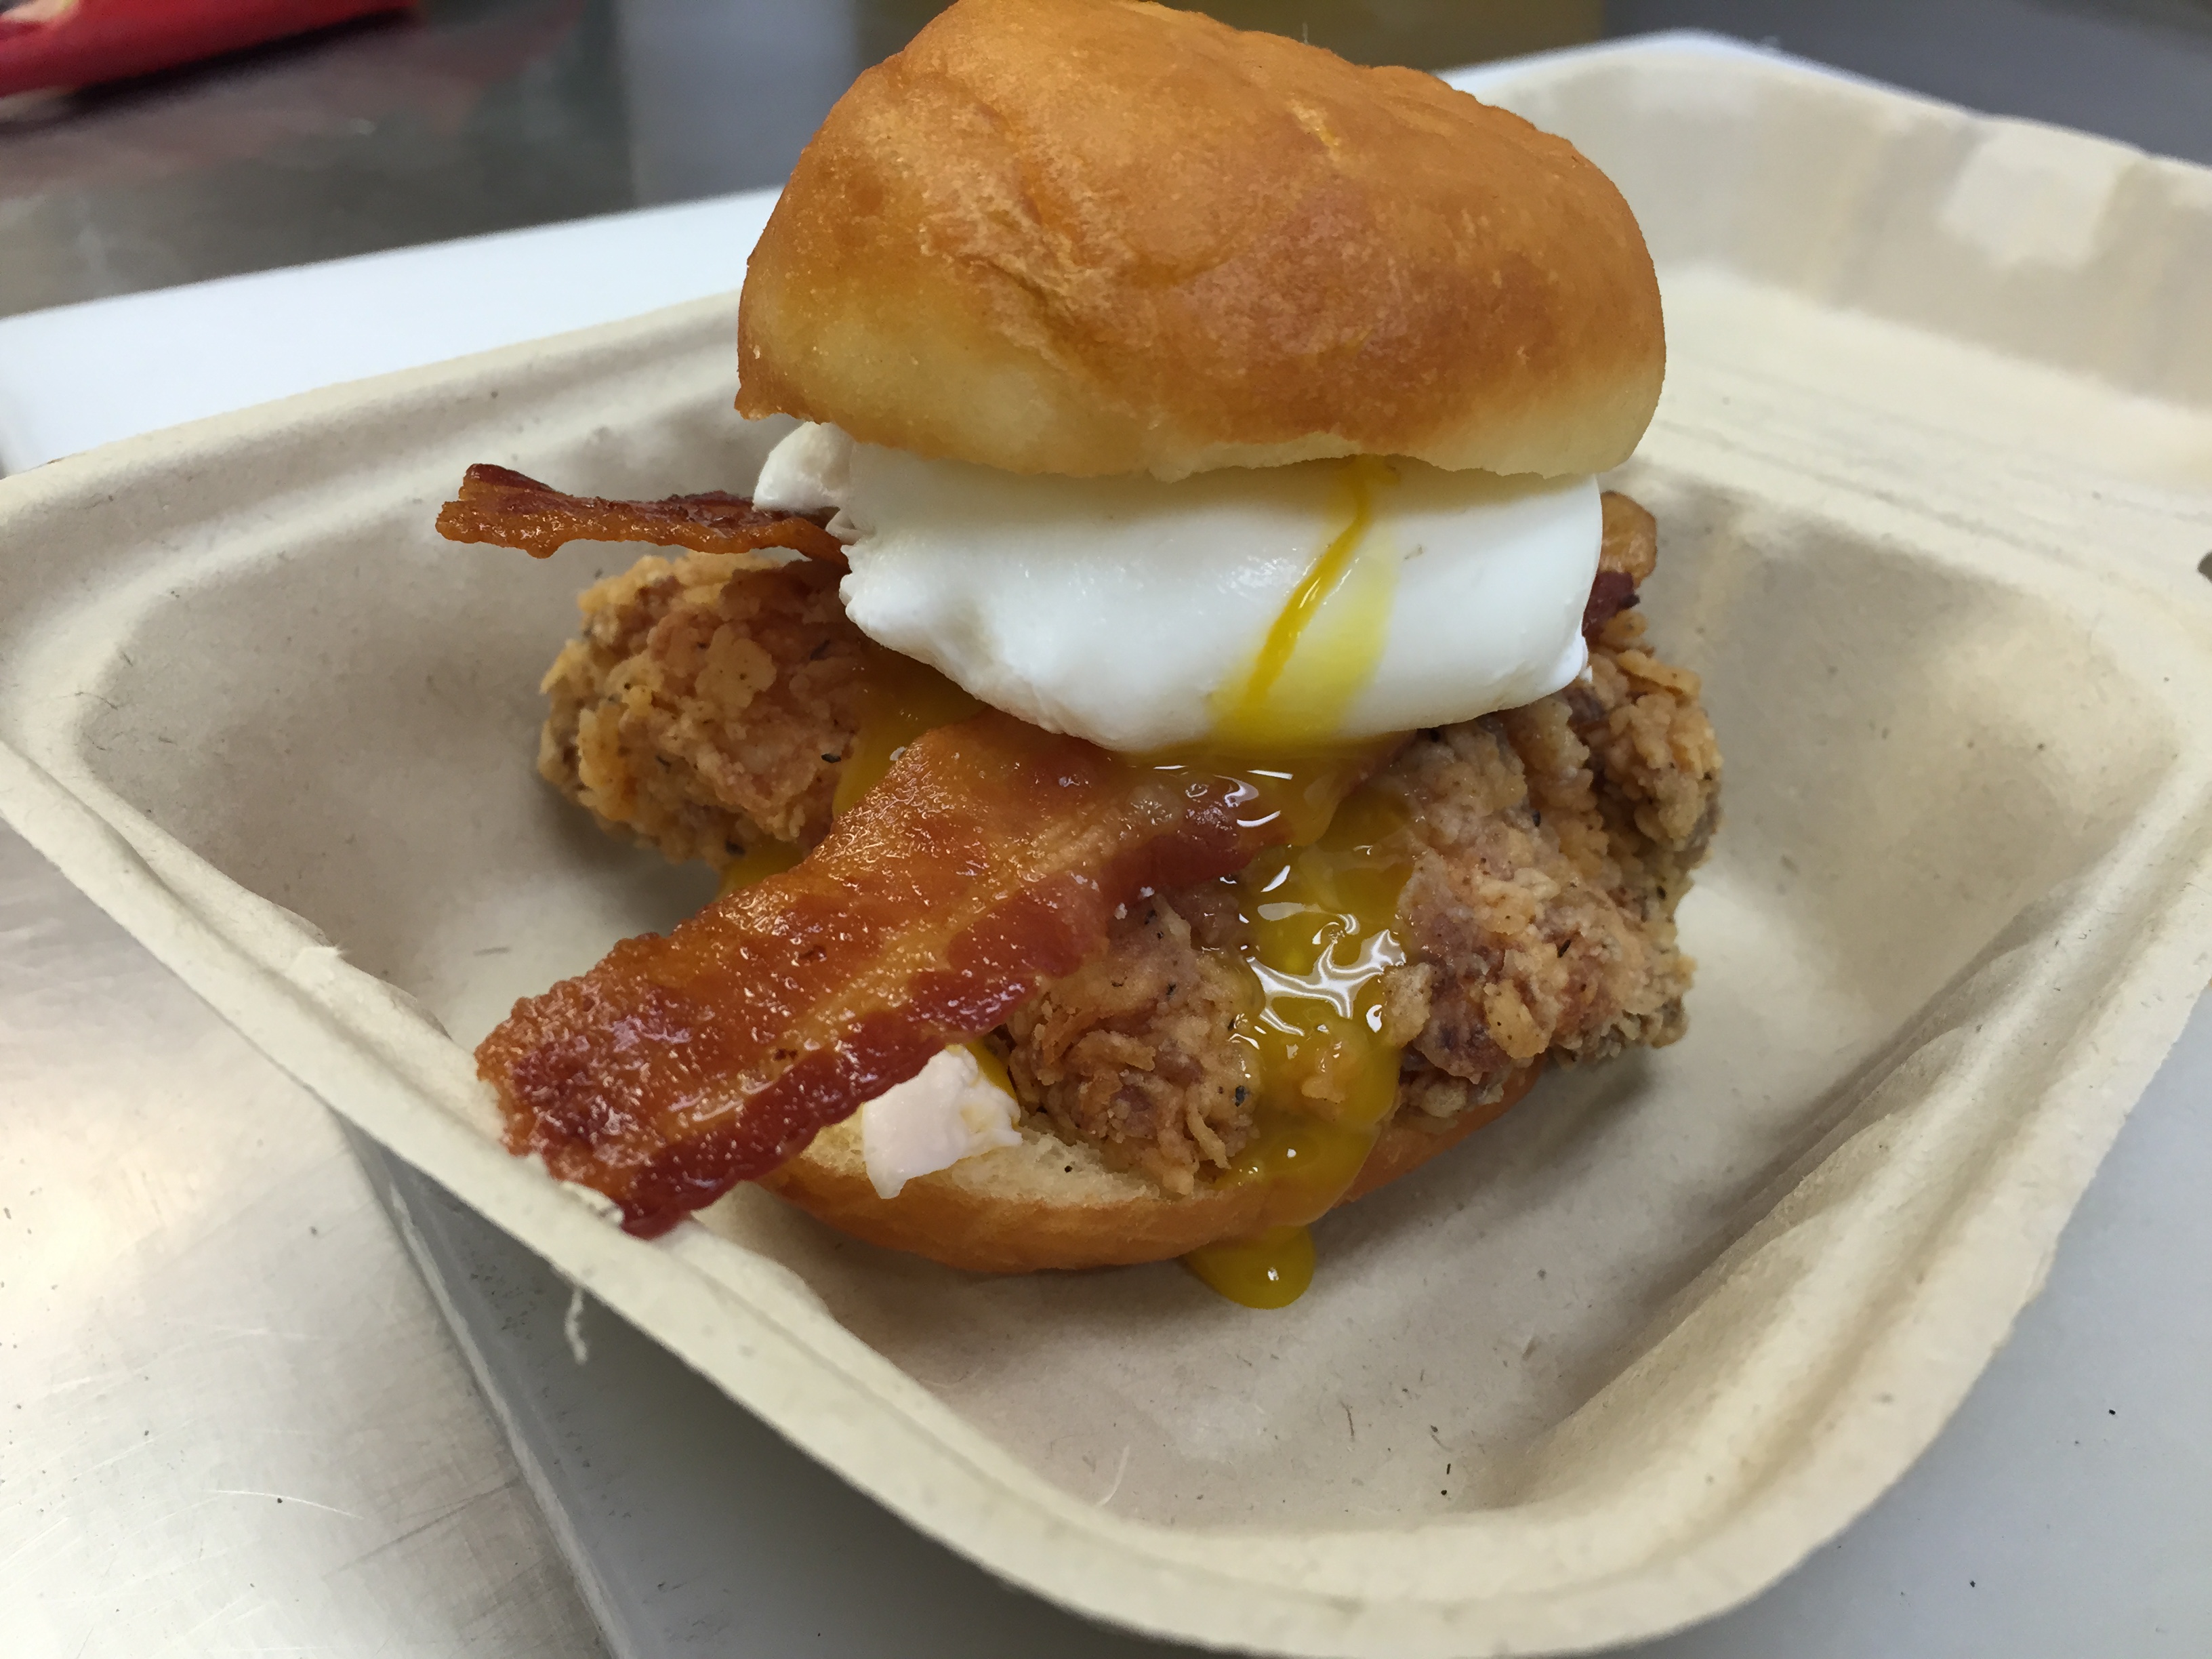 Astro Doughnuts & Fried Chicken unveils a new breakfast sandwich with poached egg, chicken and bacon on a savory doughnut last week. (Photo: Astro Doughnuts & Fried Chicken)